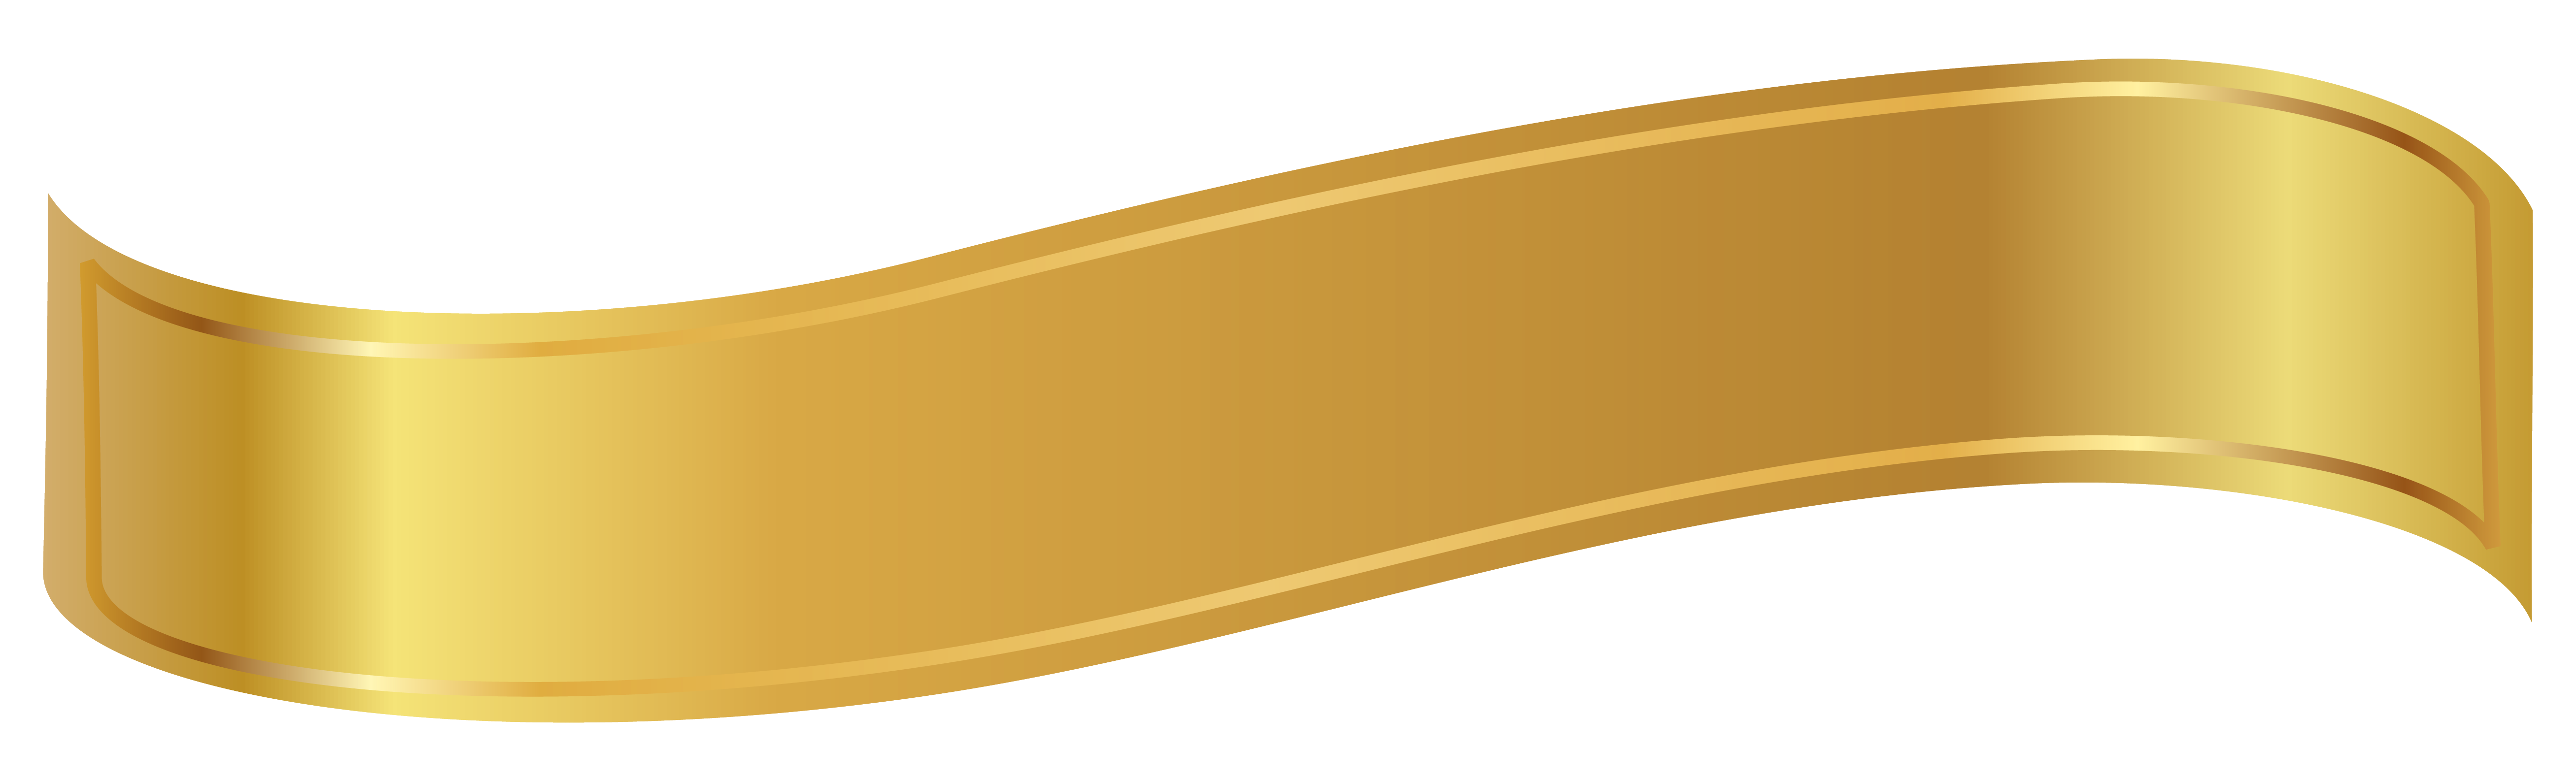 Free Gold Ribbon Transparent Download Free Gold Ribbon Transparent Png Images Free Cliparts On Clipart Library